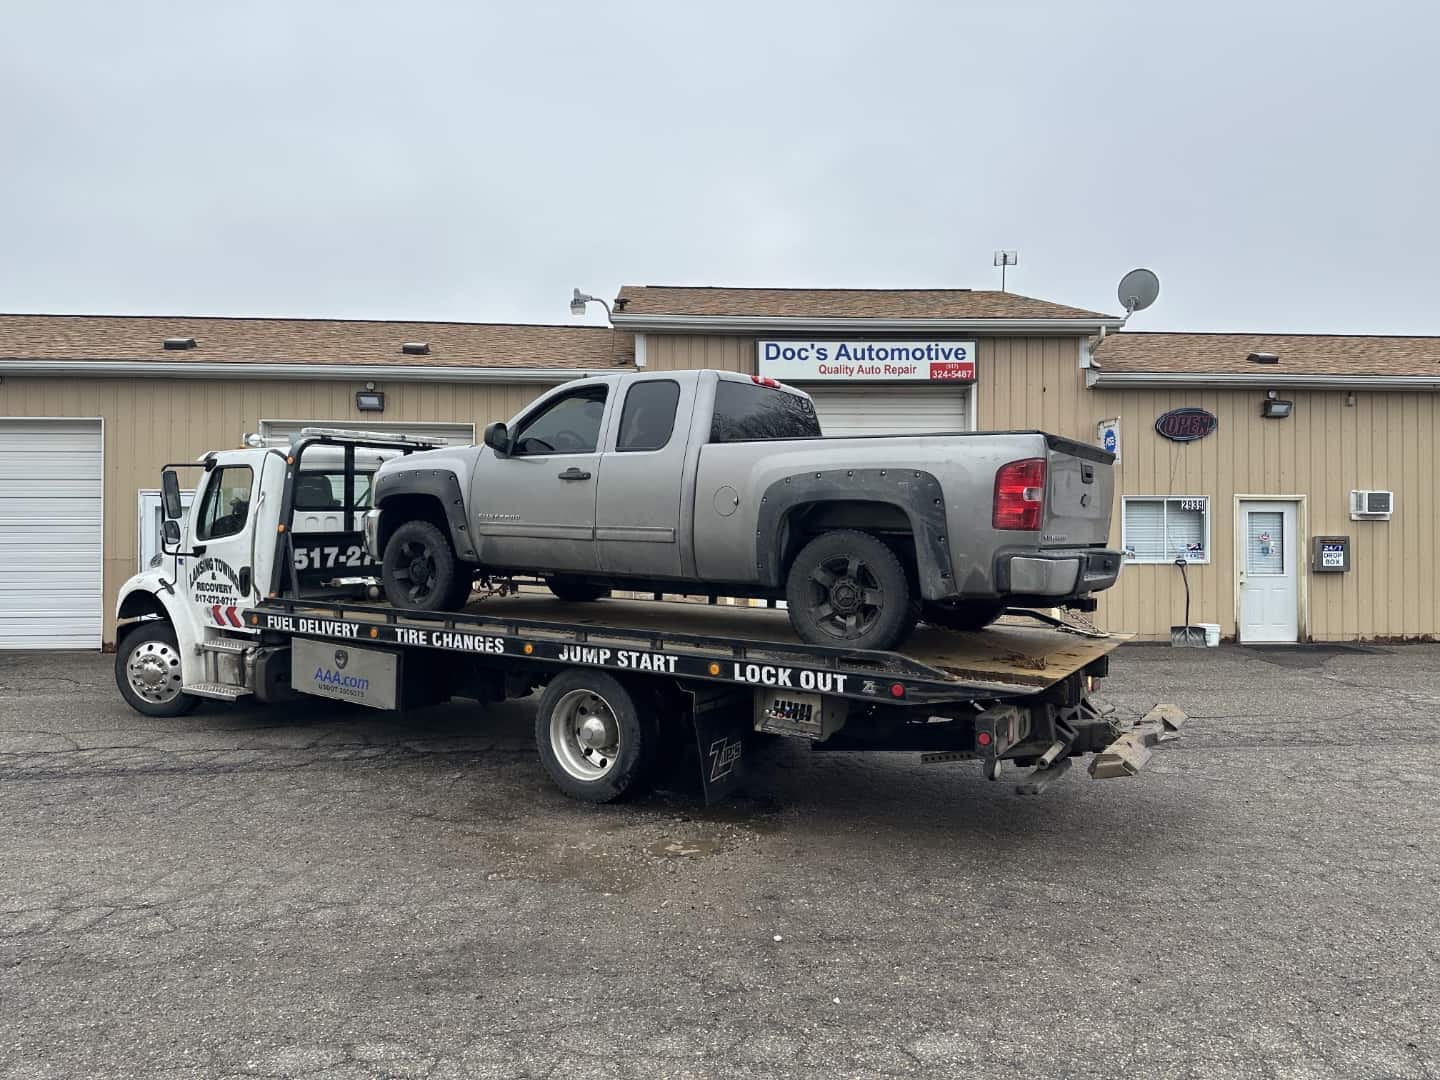 Picture of my 2013 Chevy Silverado on the back of a flatbed tow truck